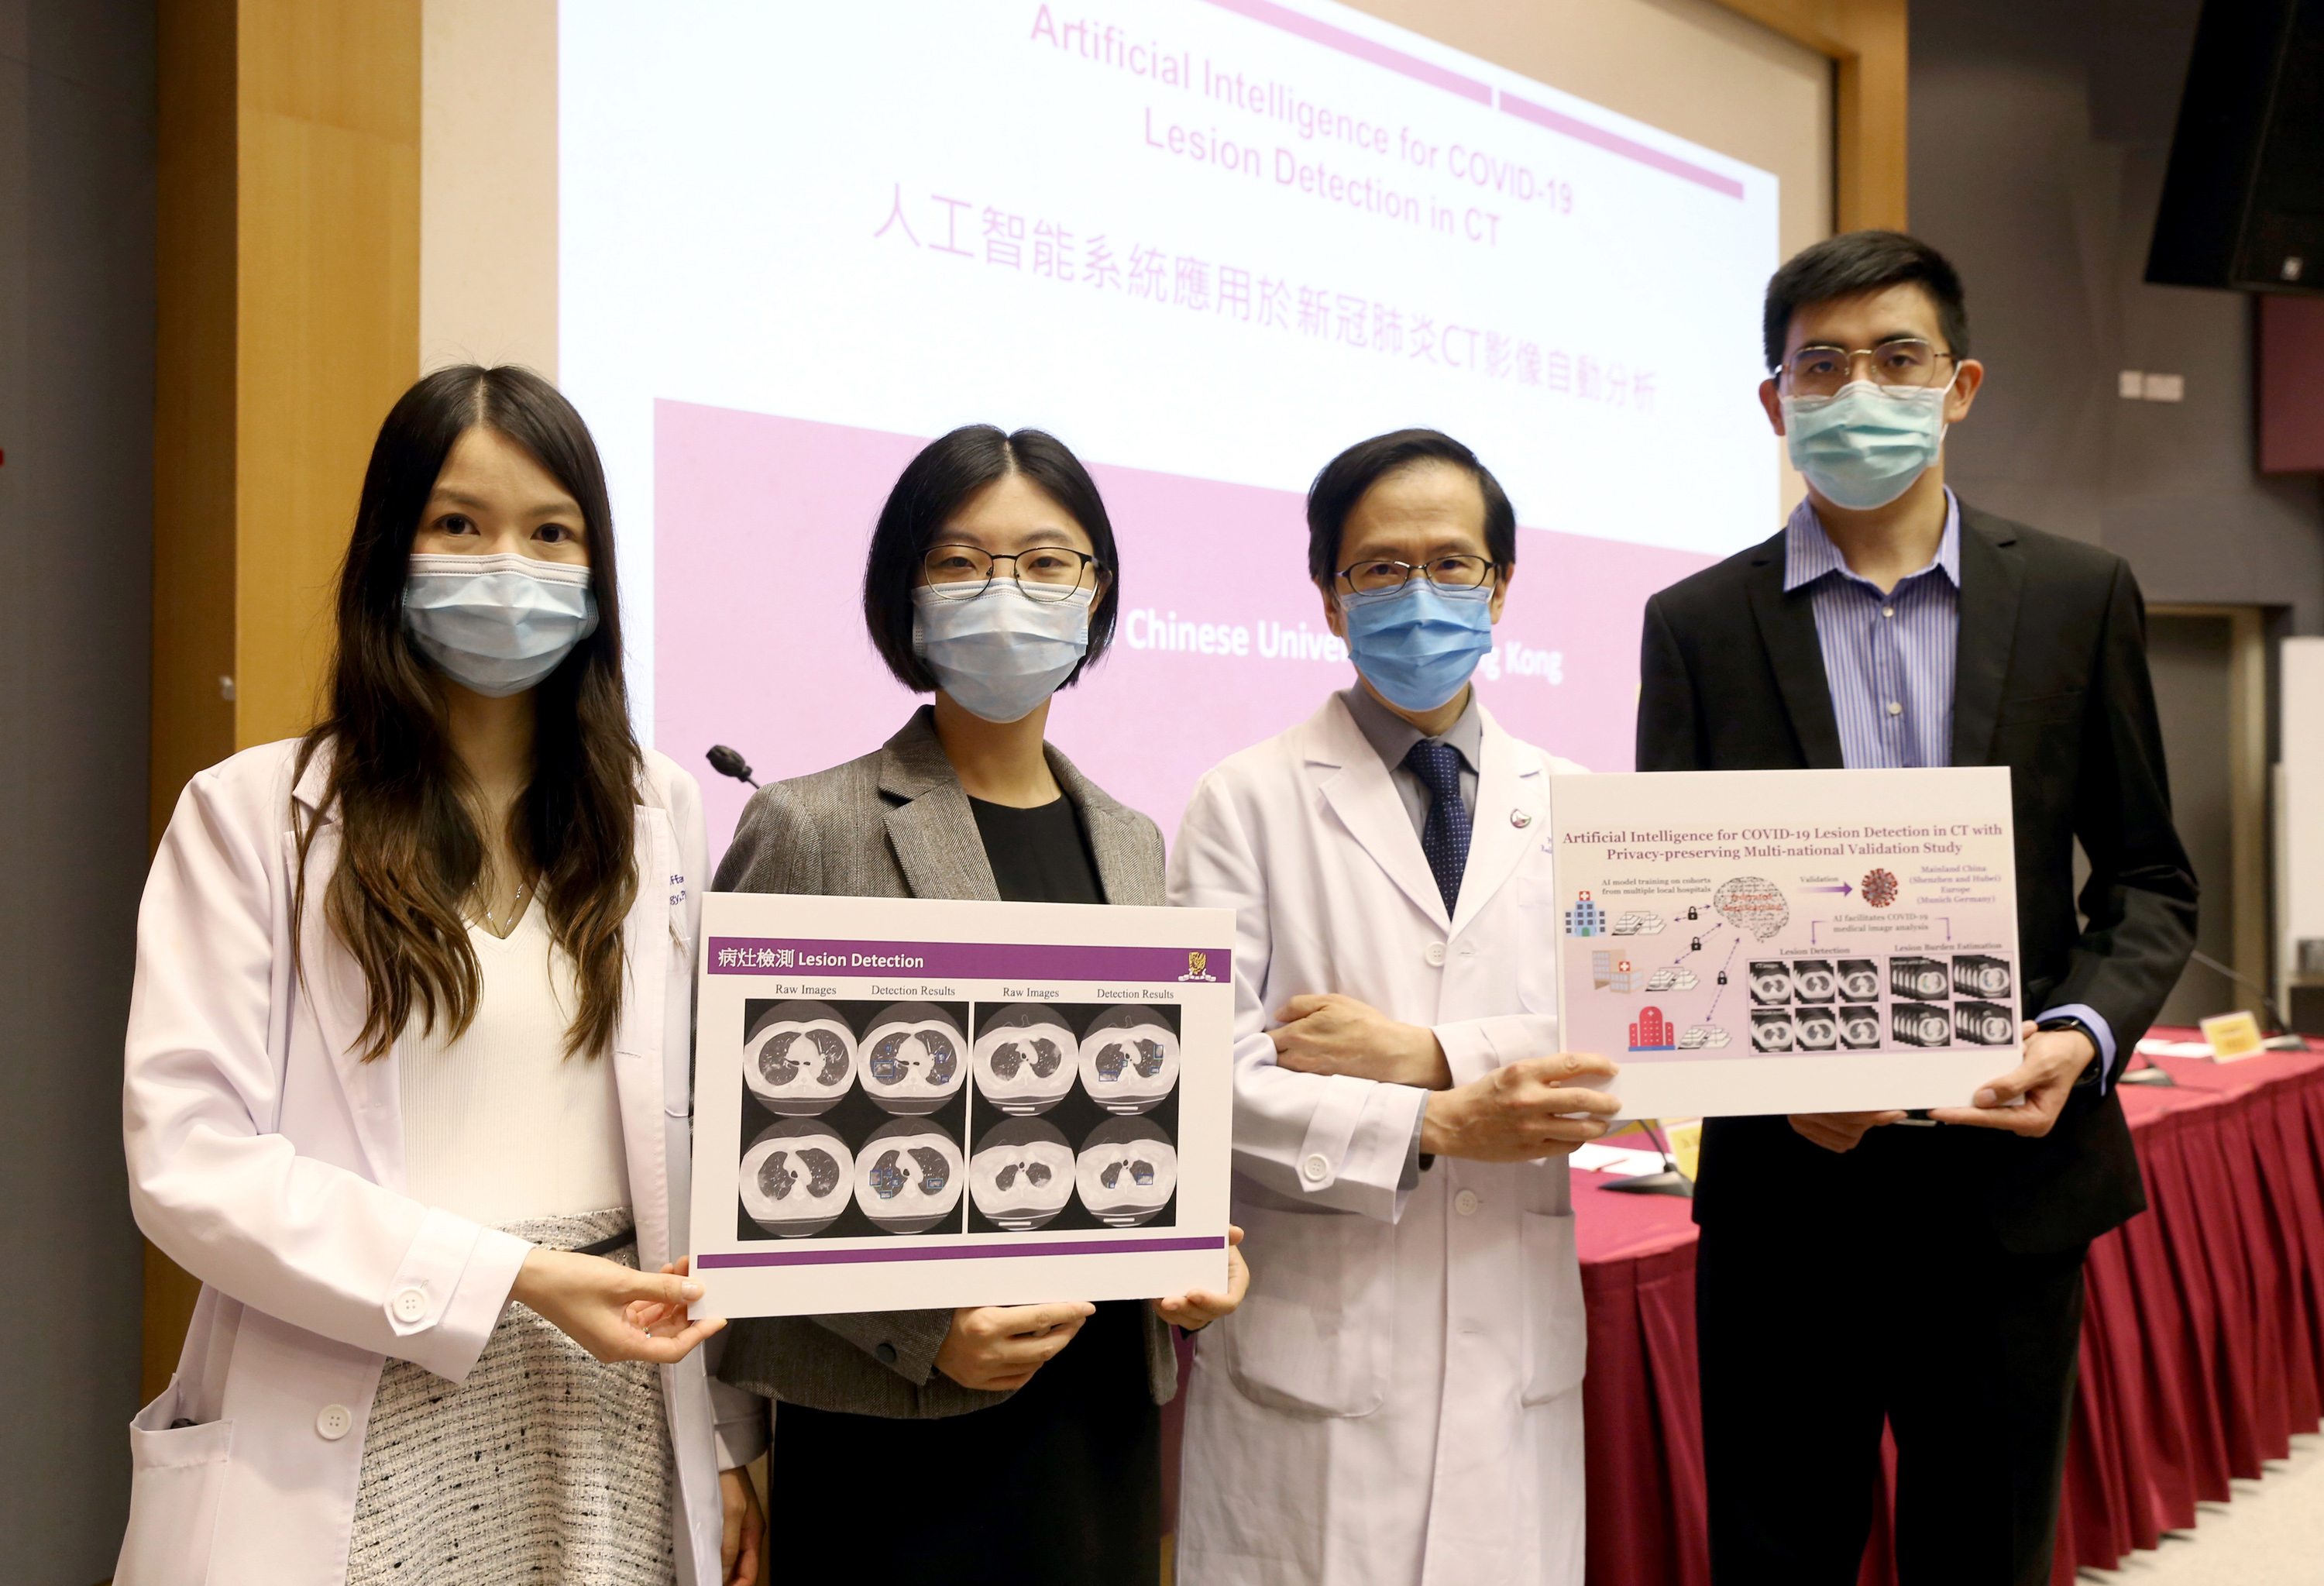 Multidisciplinary research team from CUHK has developed an AI system for the detection of COVID-19 infections in chest CT images.